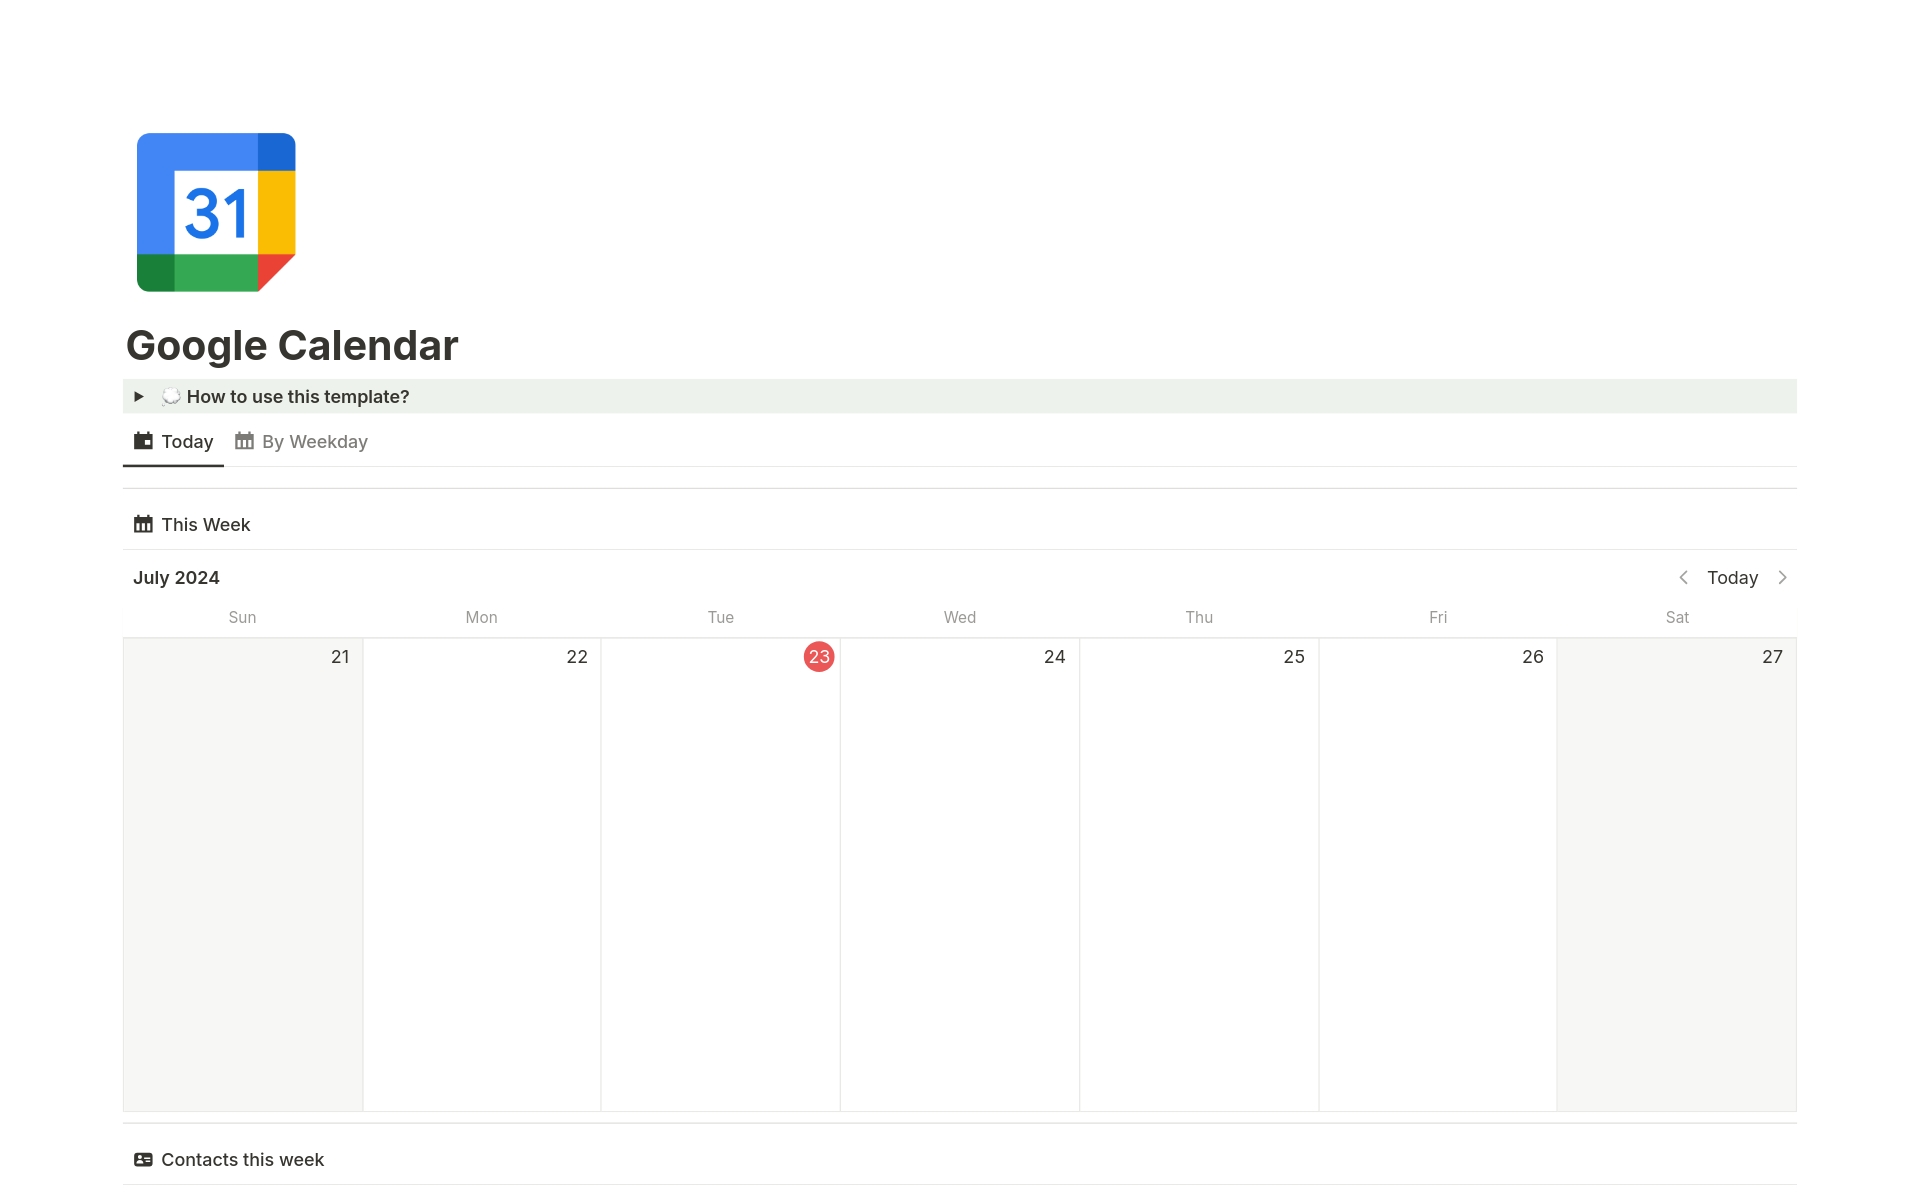 This template syncs your Google Calendar events with Notion for seamless schedule management. Easy to set up, it ensures your events are always up-to-date in one place. Ideal for professionals, students, and anyone seeking organized efficiency. No more app switching!